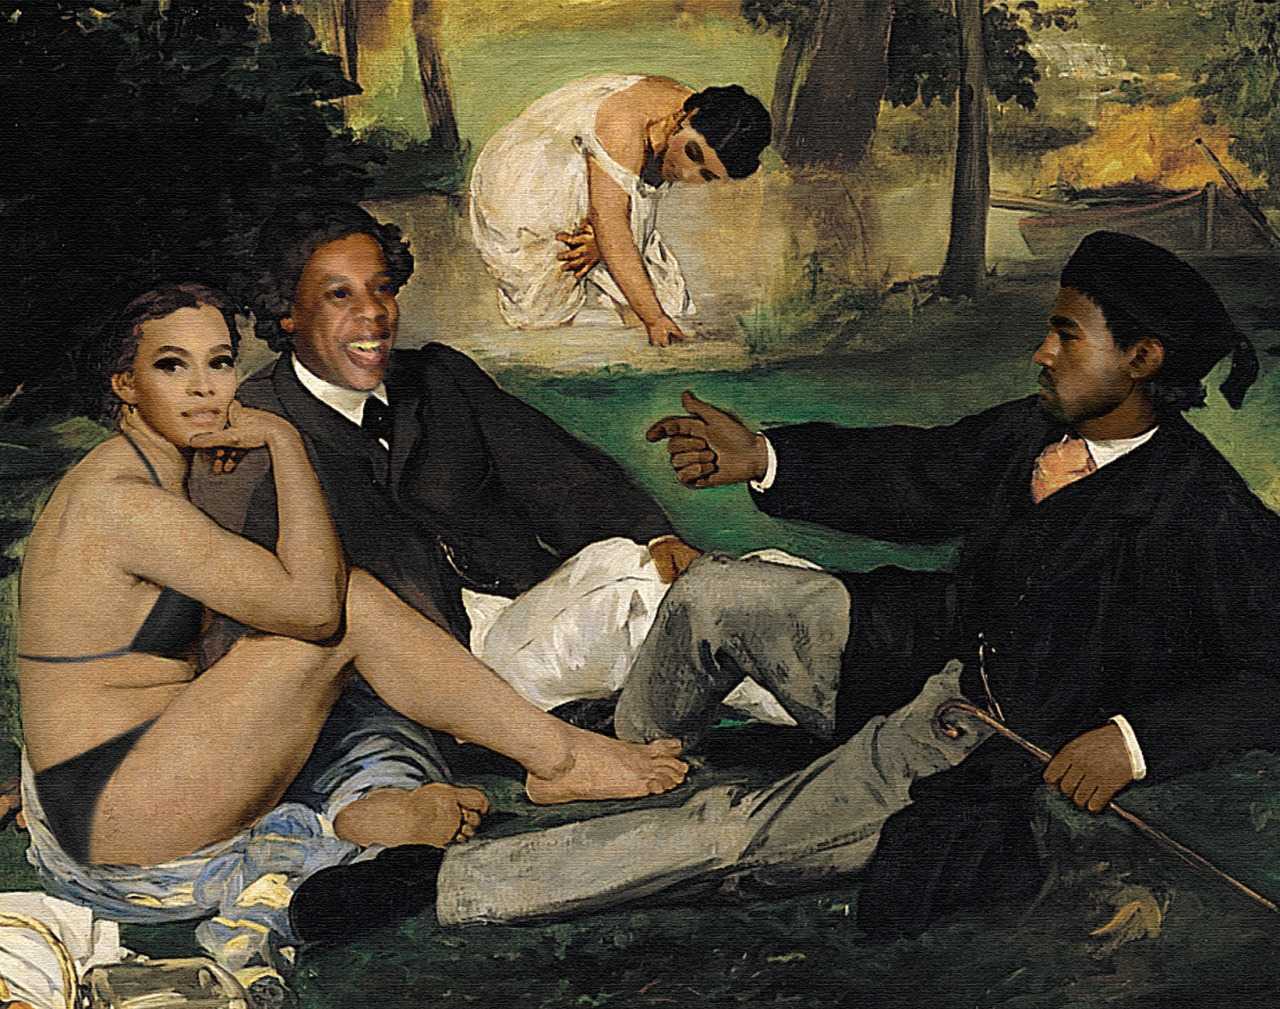 Bey, Jay, Kanye &amp; Kim enjoy a relaxing day by one of the family estate&#8217;s many woodland ponds. Kanye tells a joke, Jay laughs politely.  Bey is unamused.  